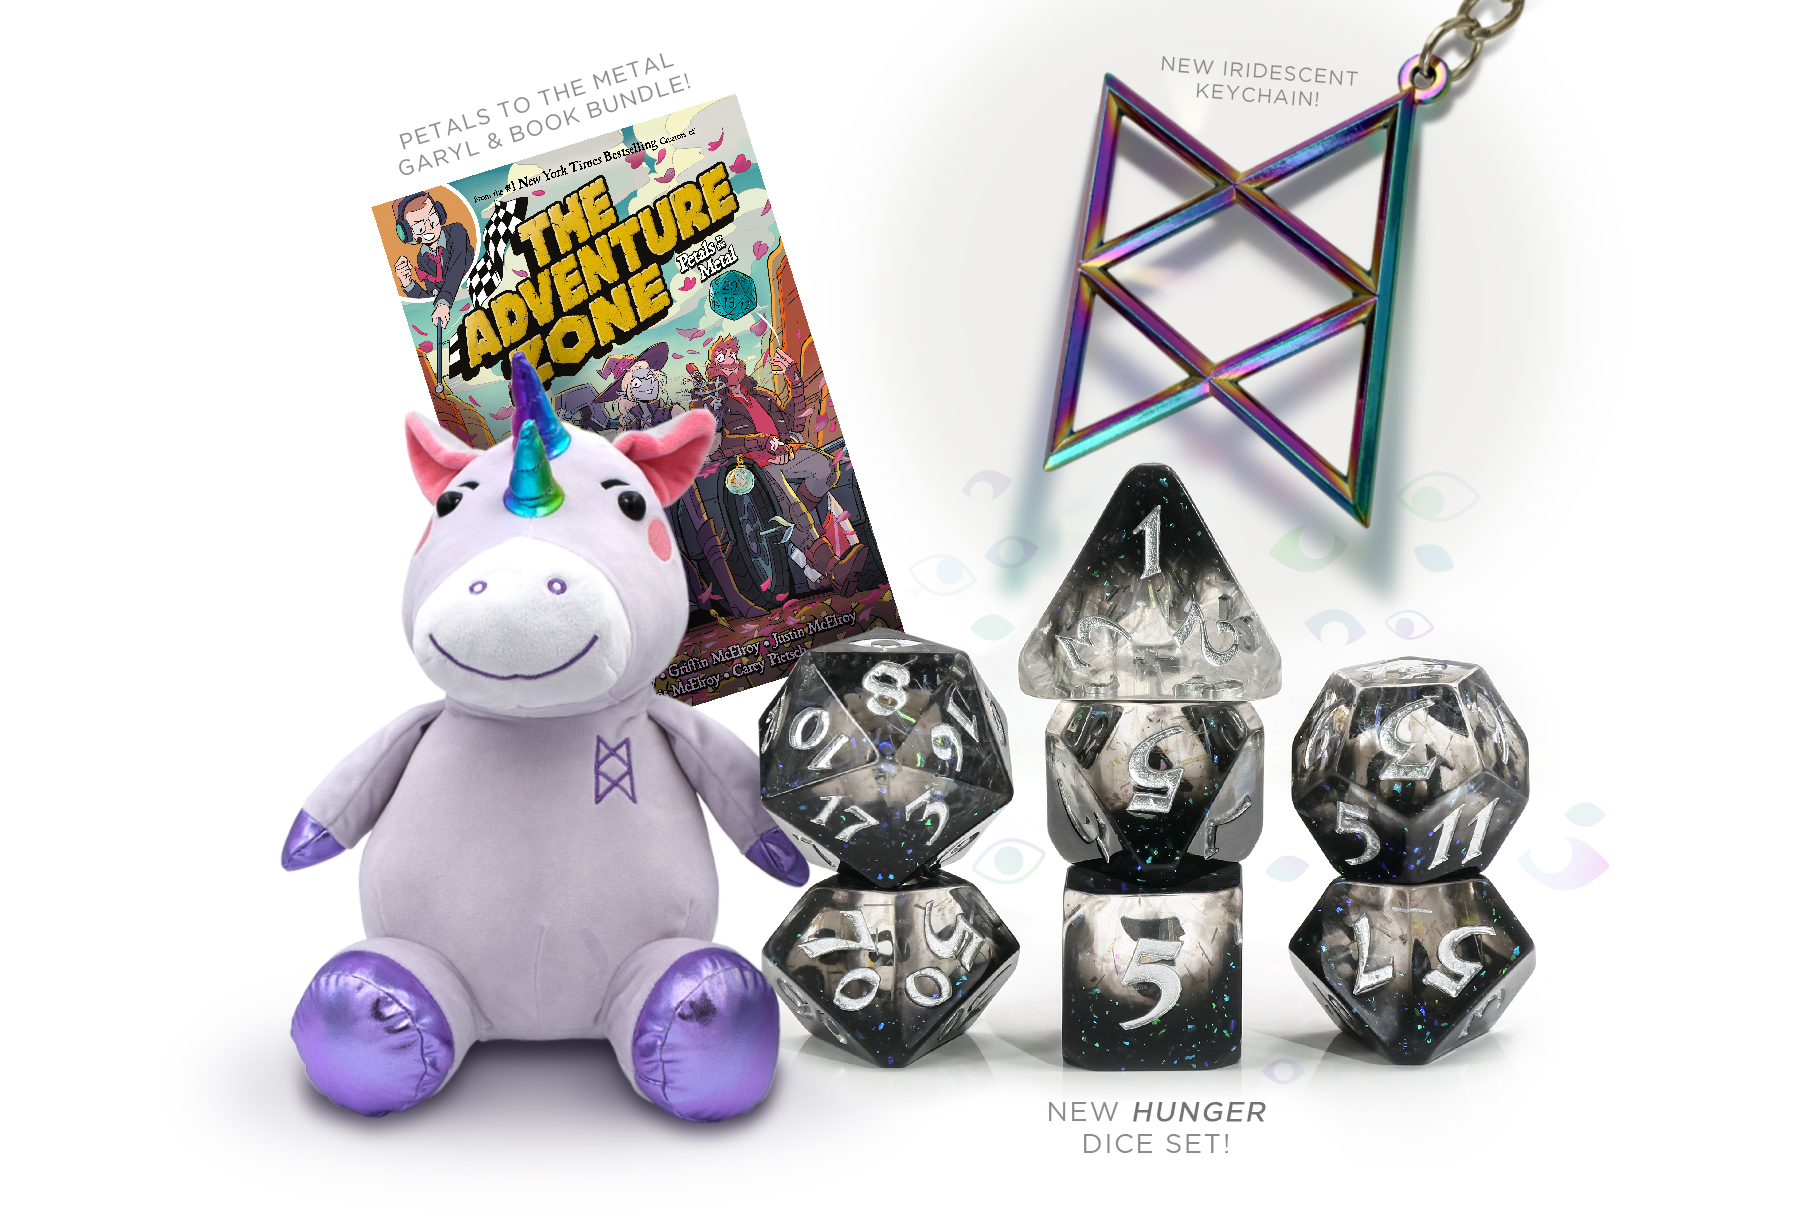 Images for the December McElroy merch items. On the left is an image of the Garyll plushie with the cover art for the Petals to the Metal graphic novel behind it. They are being sold as a bundle. On the top right is a rainbow anodized metal keychain in the shape of the BoB symbol. On the bottom right is a set of polyhedral dice made of clear and black resin with iridescent glitter throughout. The numbers are painted white.